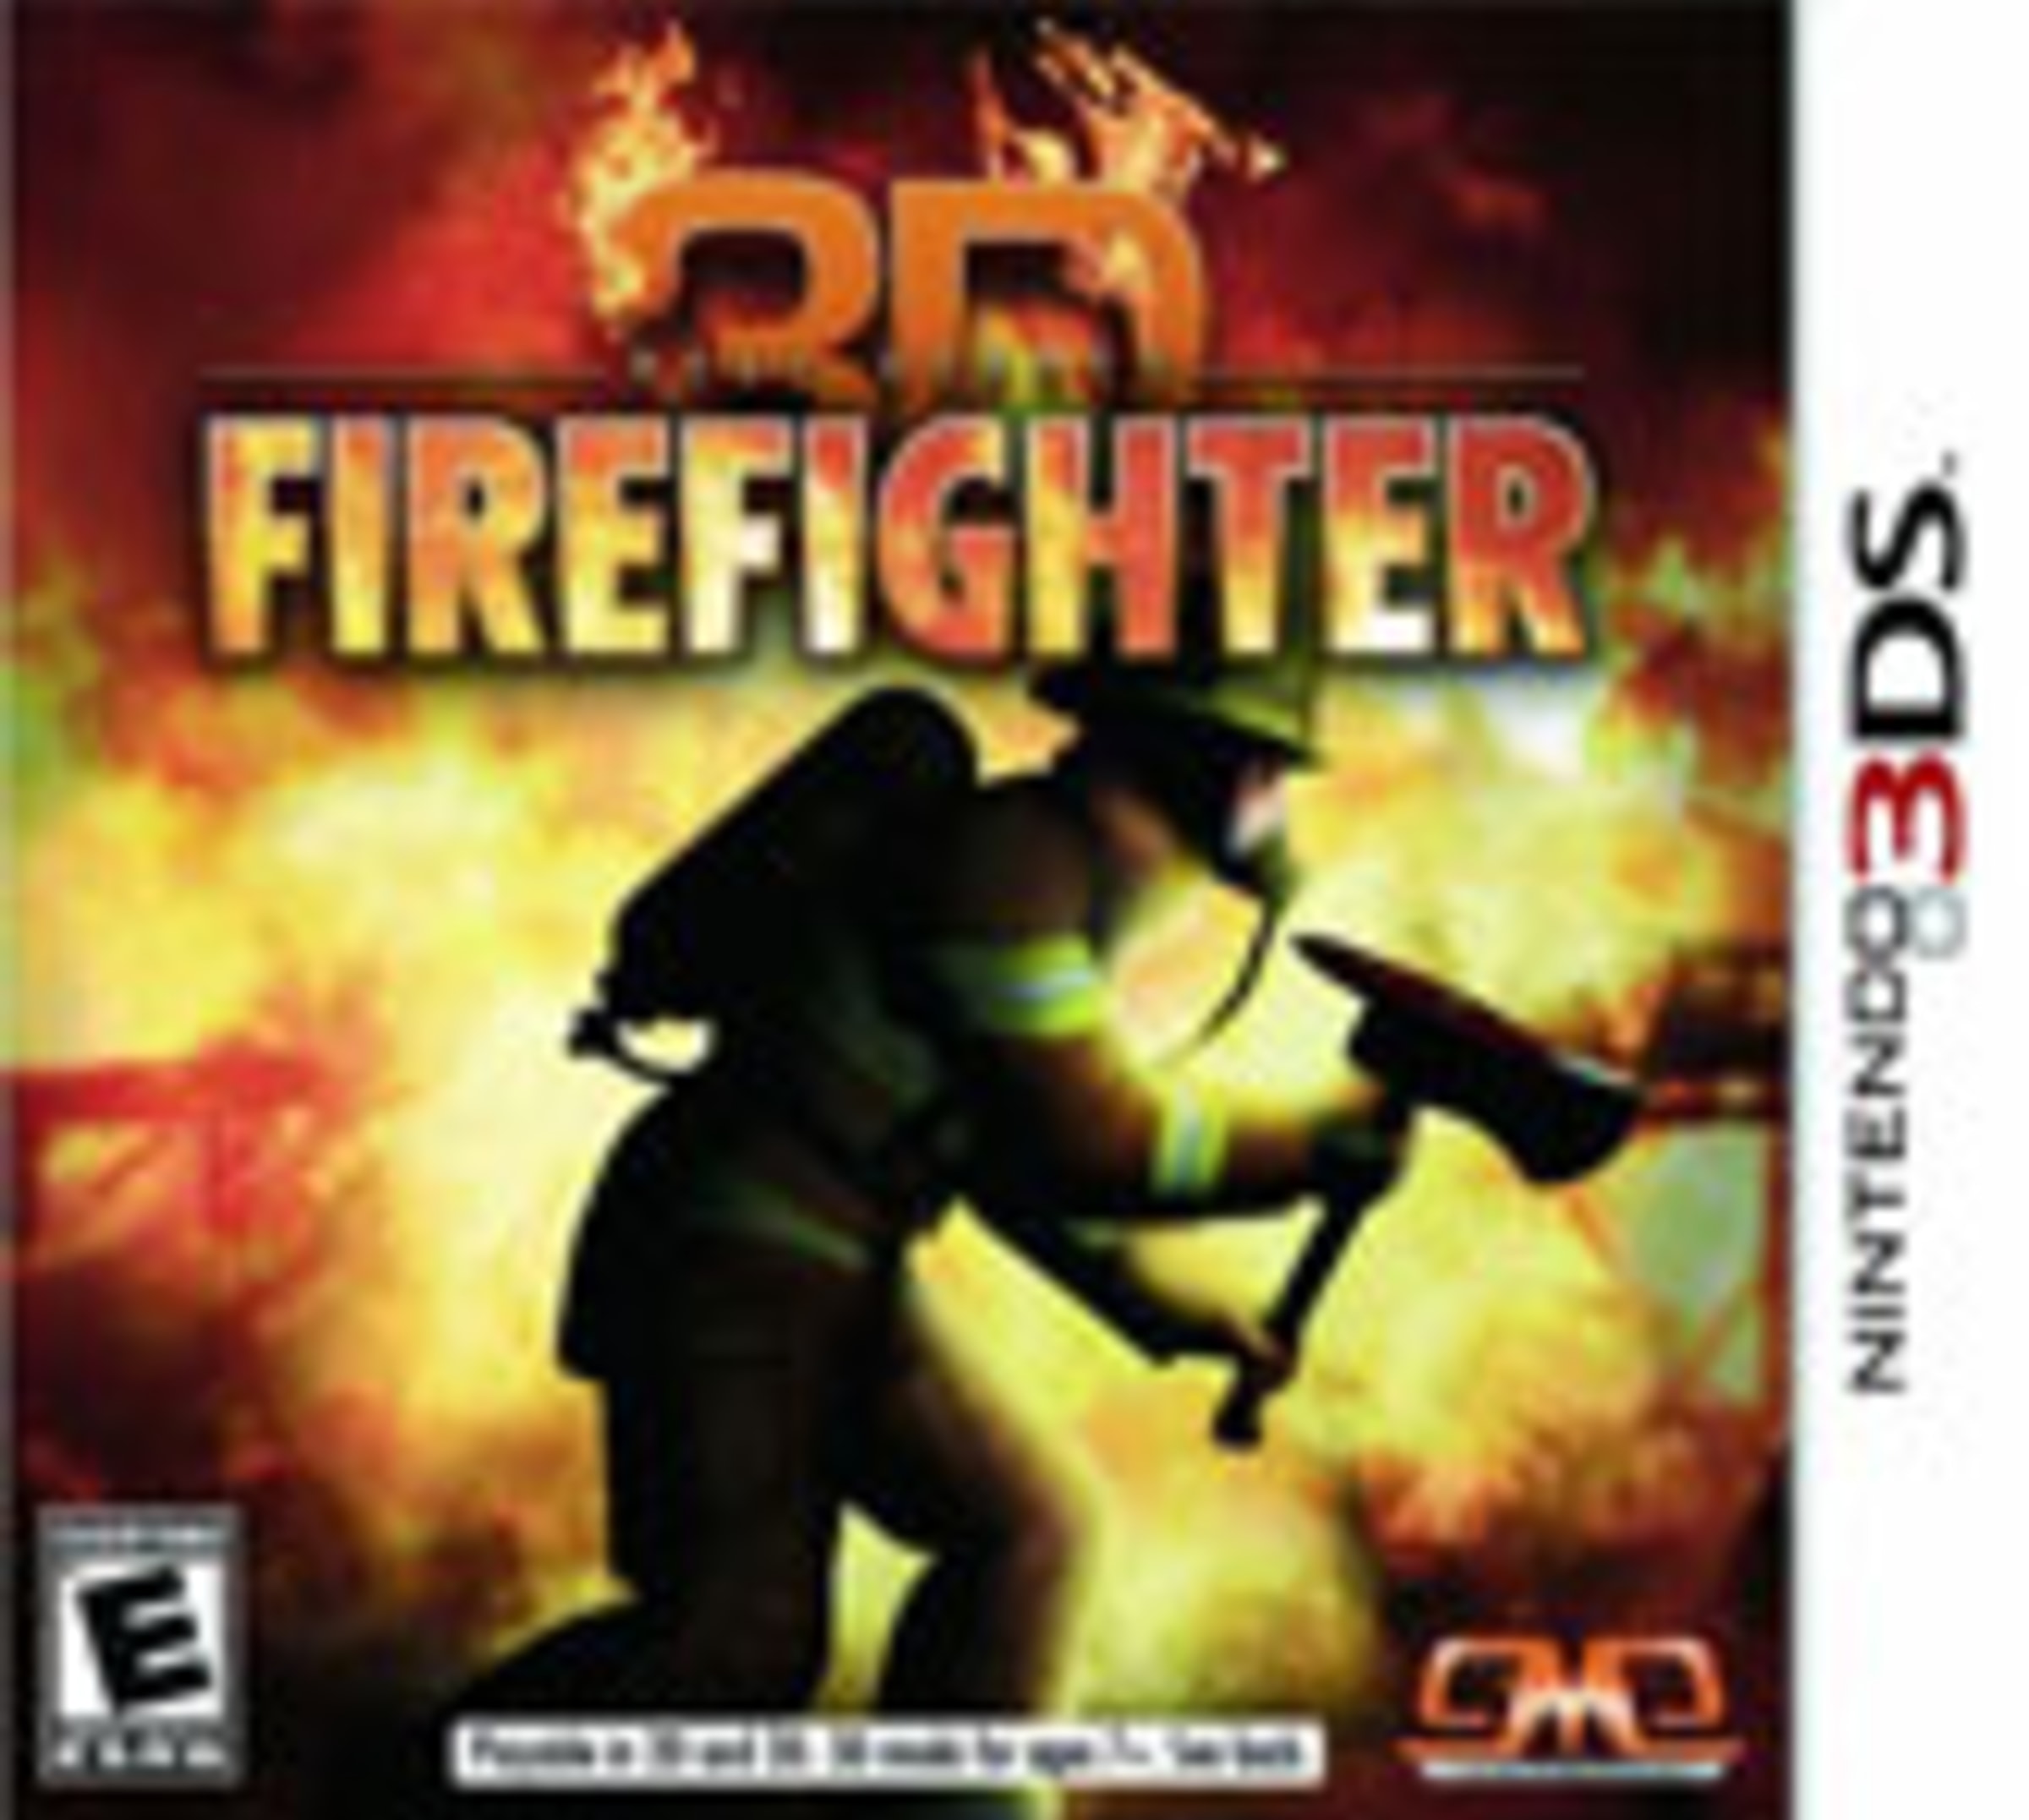 Real Firefighter 3D for 3DS - Nintendo Official Site